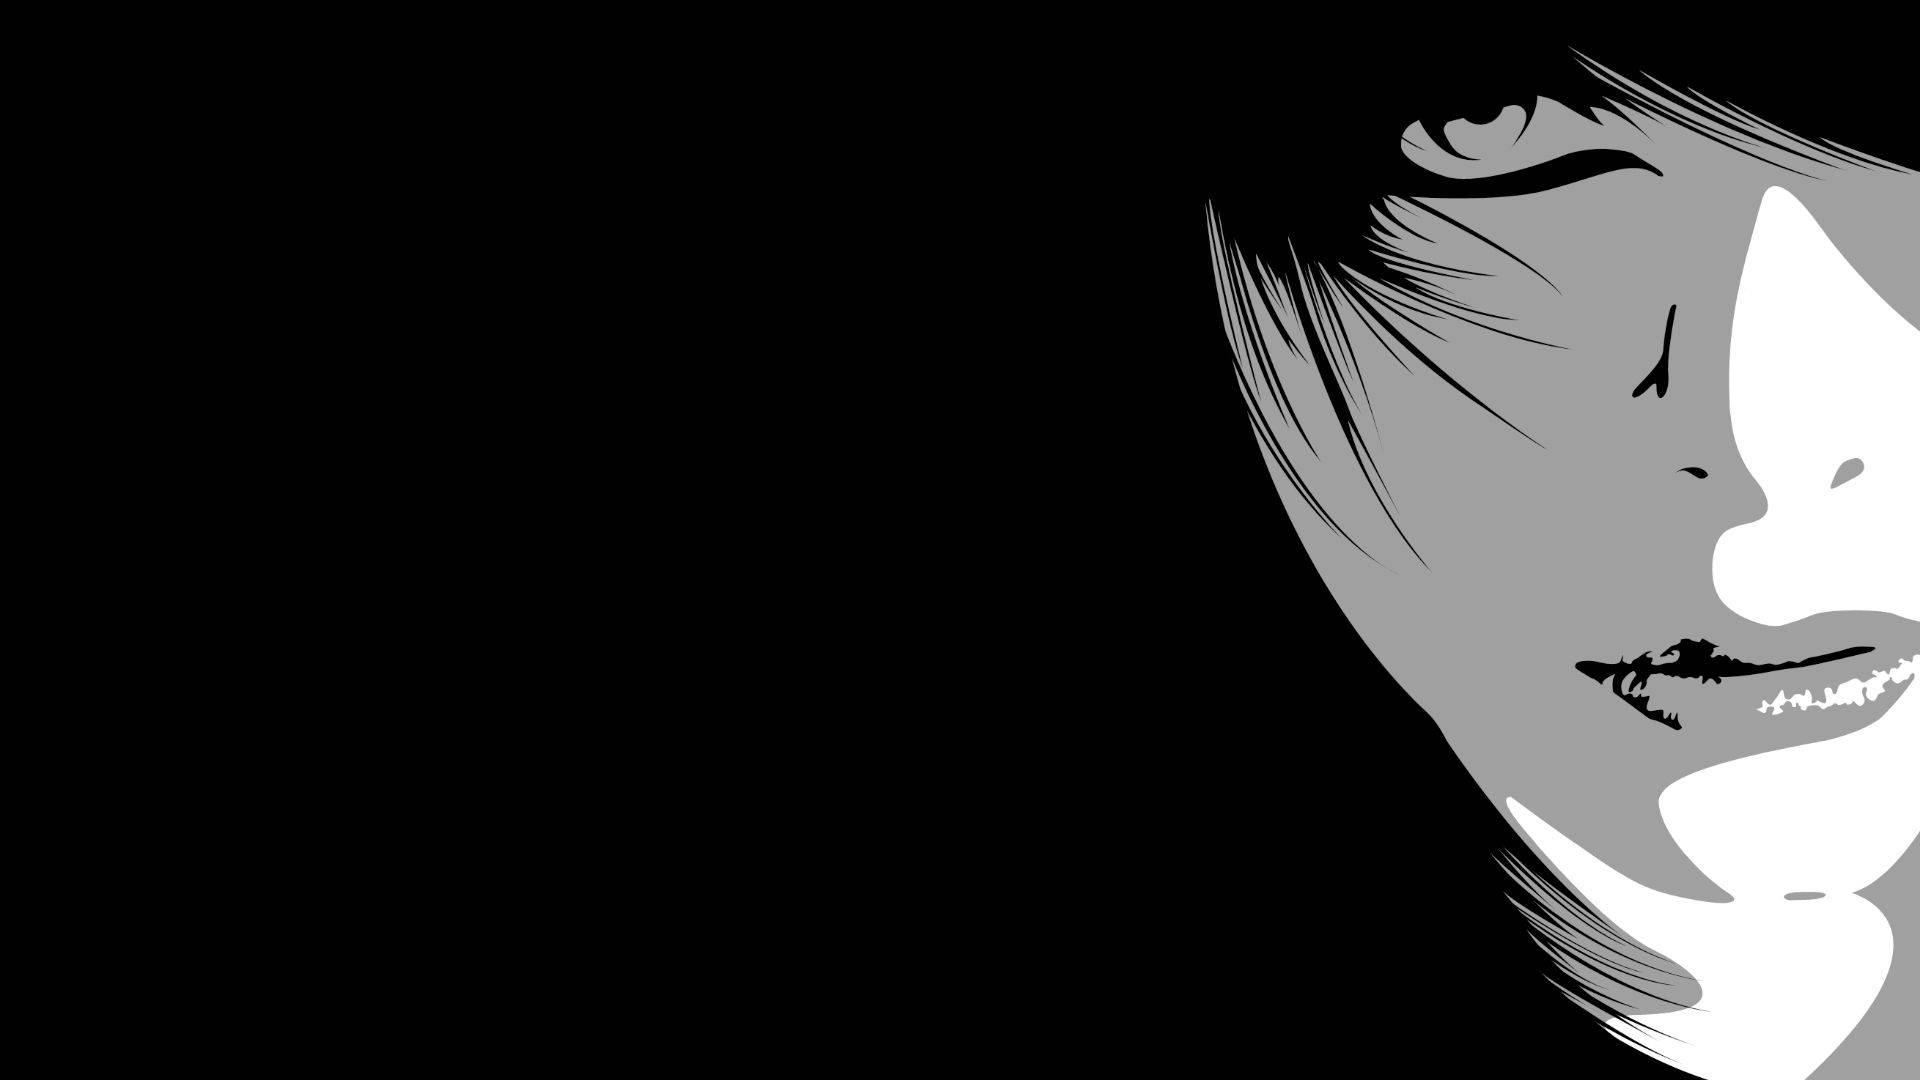 An Emo Girl With an Intense Expression Wallpaper